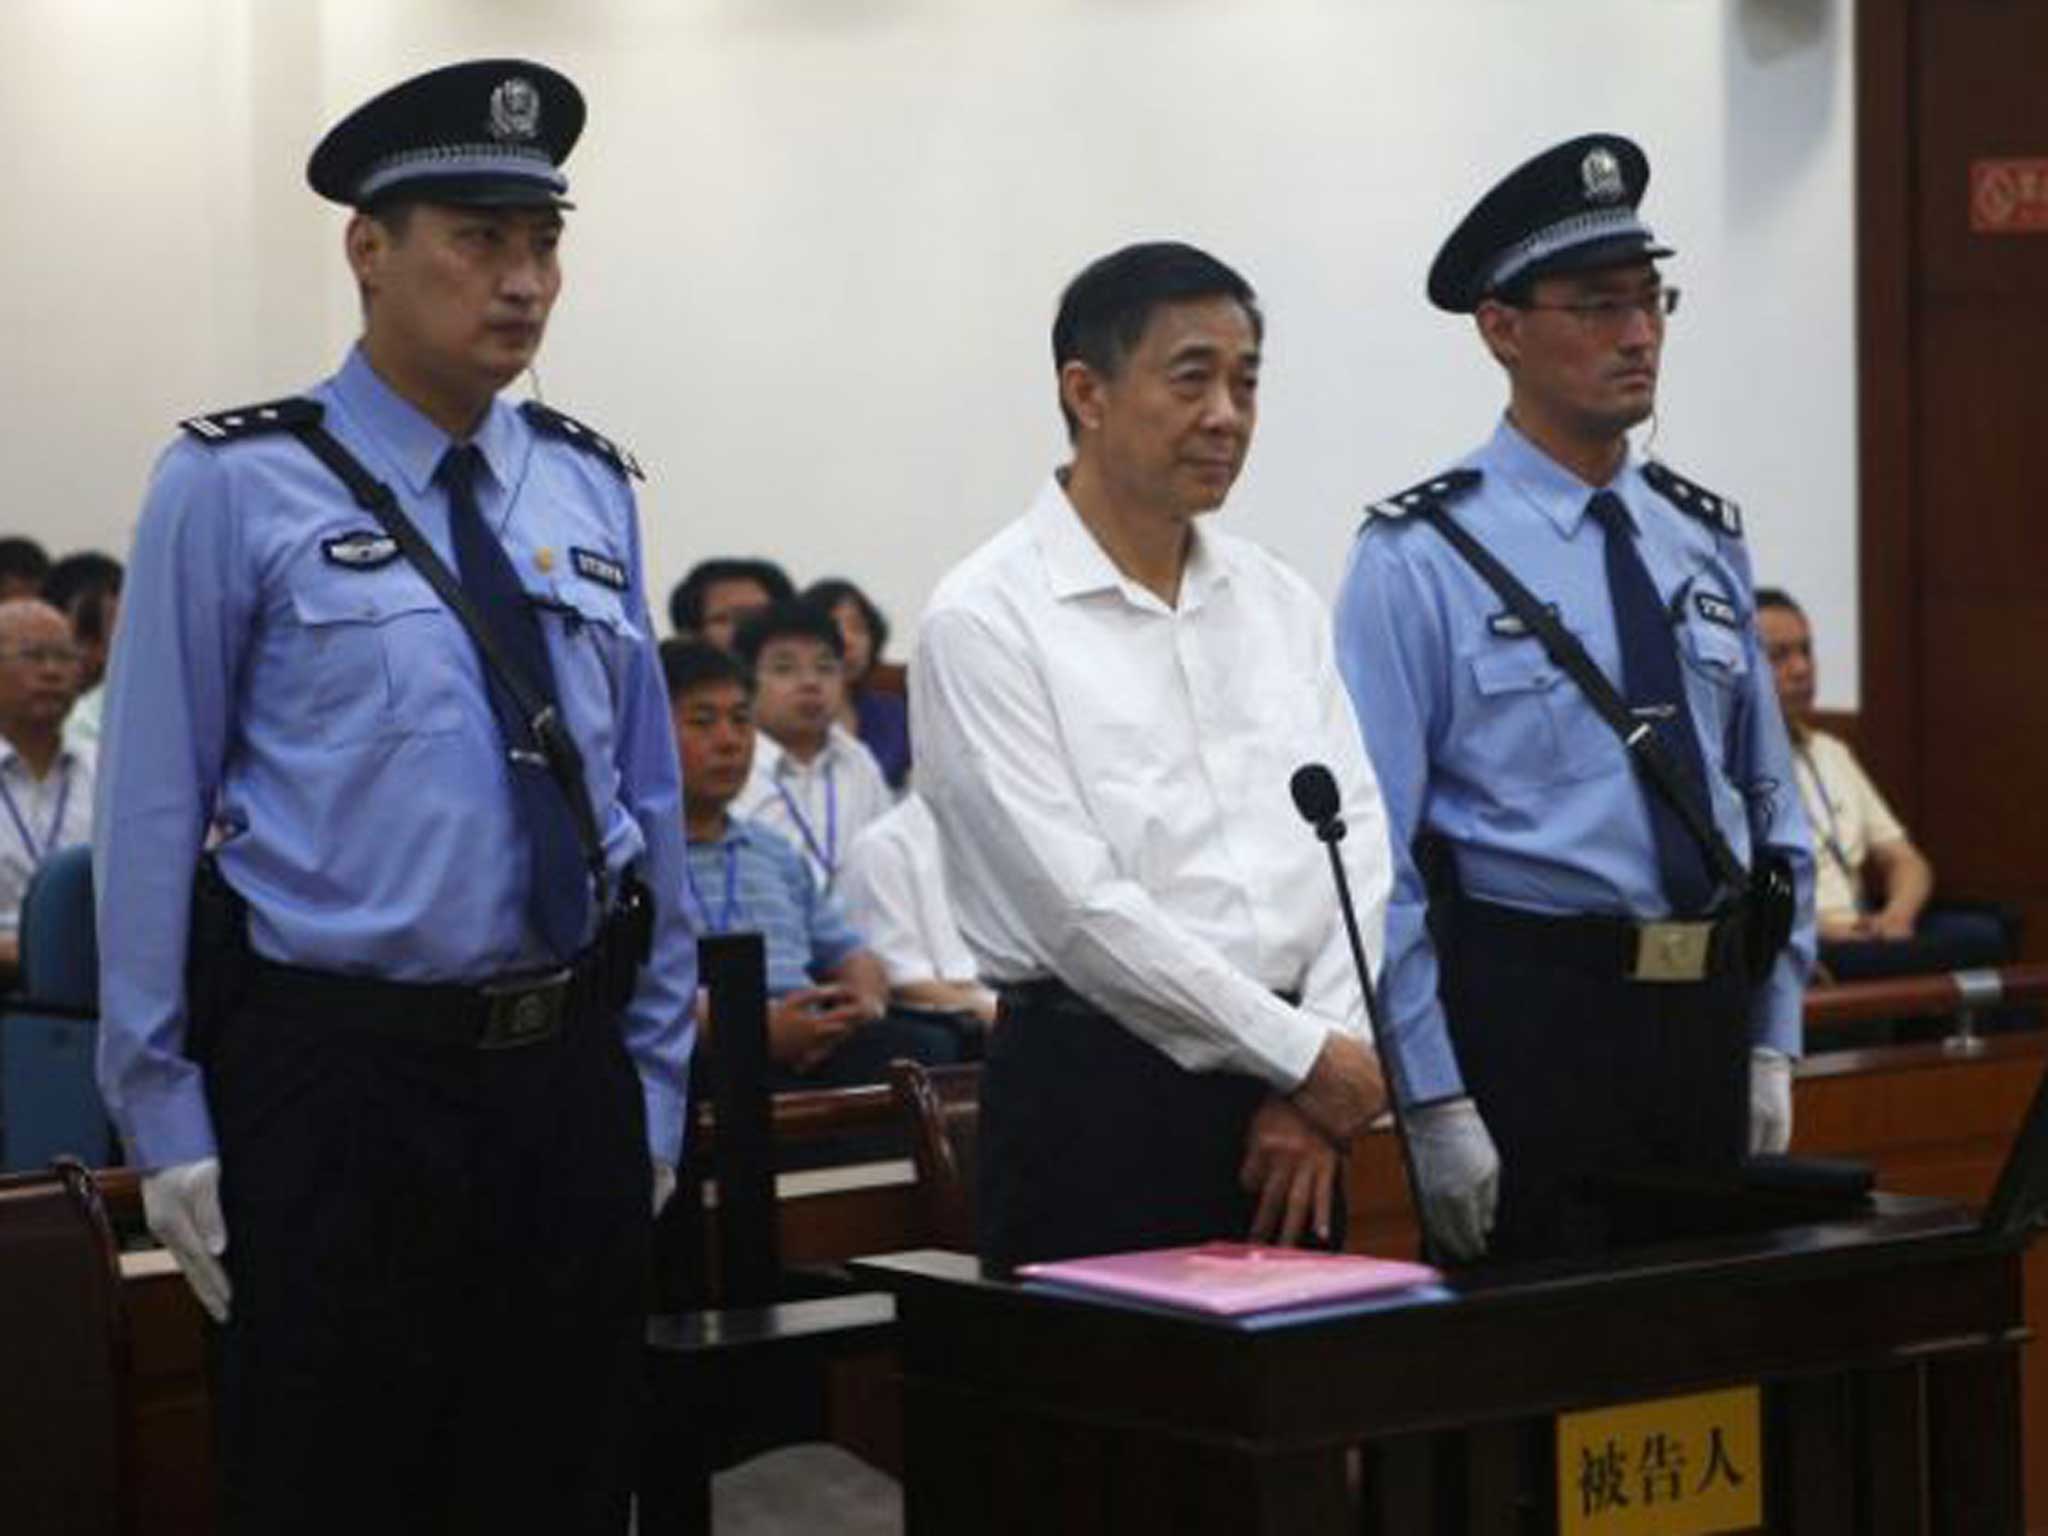 Bo Xilai stands trial in August 2013